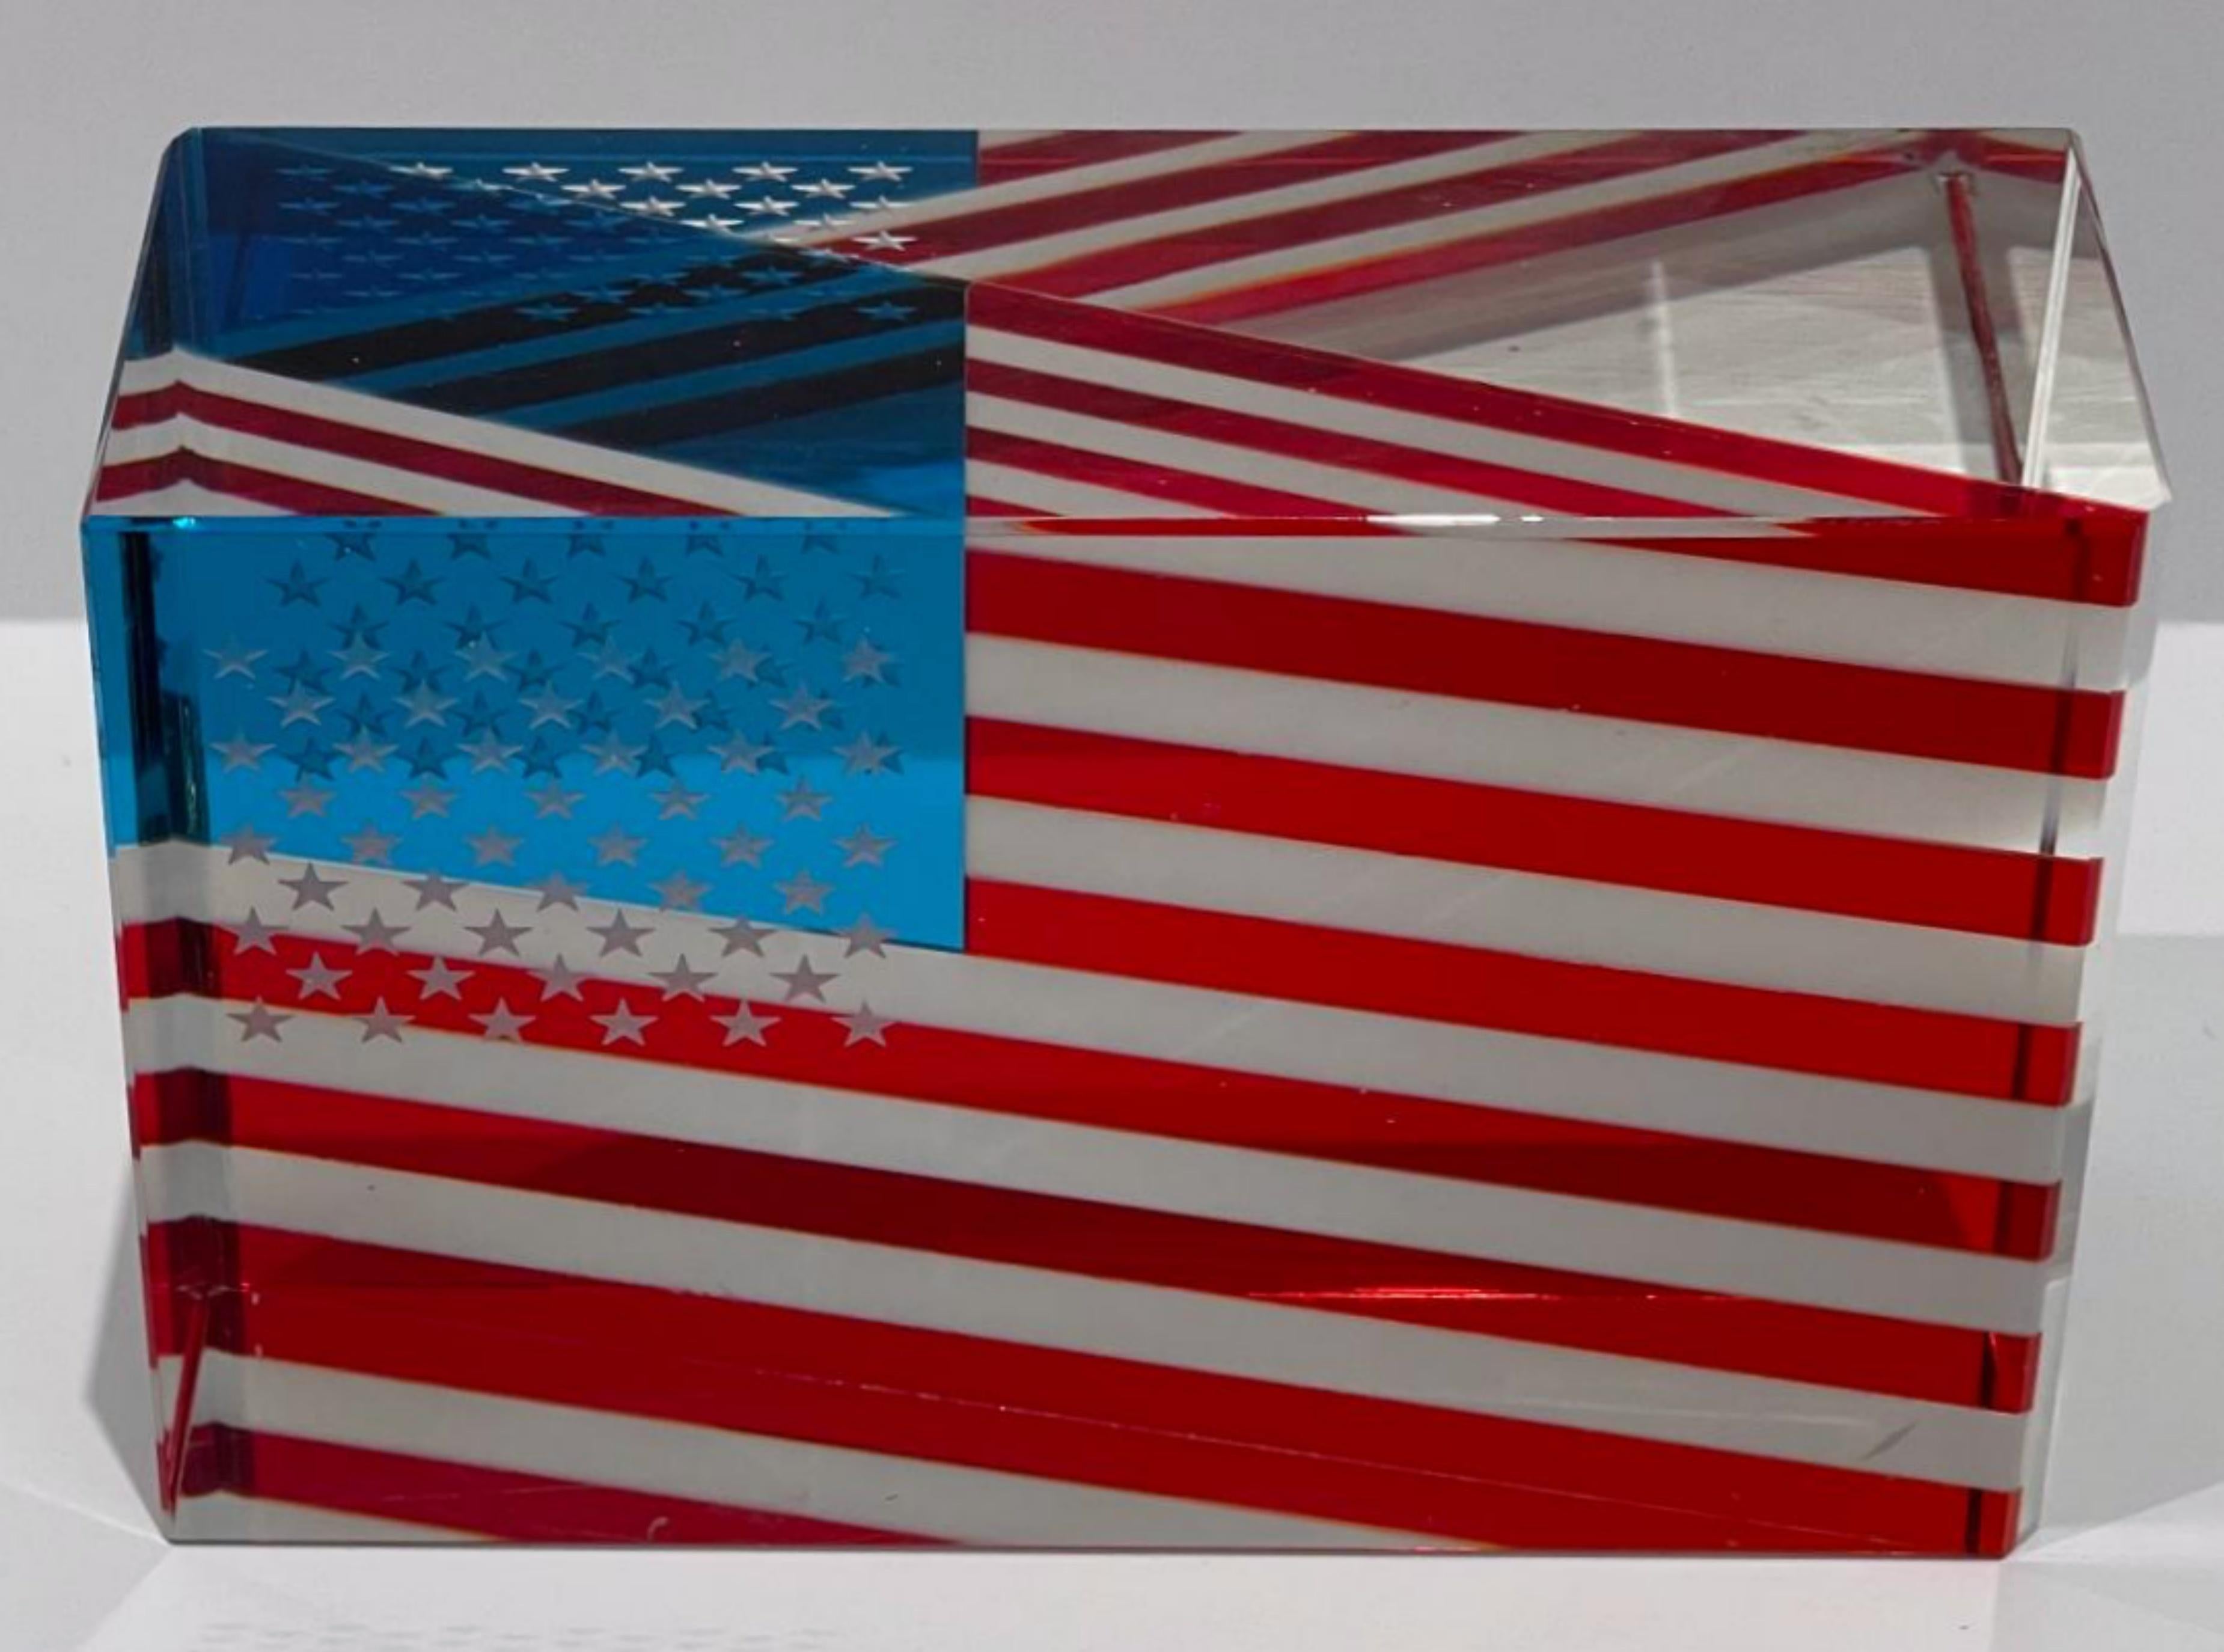 JAN MARES
Jan Mares (Czech, 1953-2005) 
3-D Glass American Flag, 2002
Cut, polished, and etched glass
3 × 5 × 2 inches
incised signature and date
